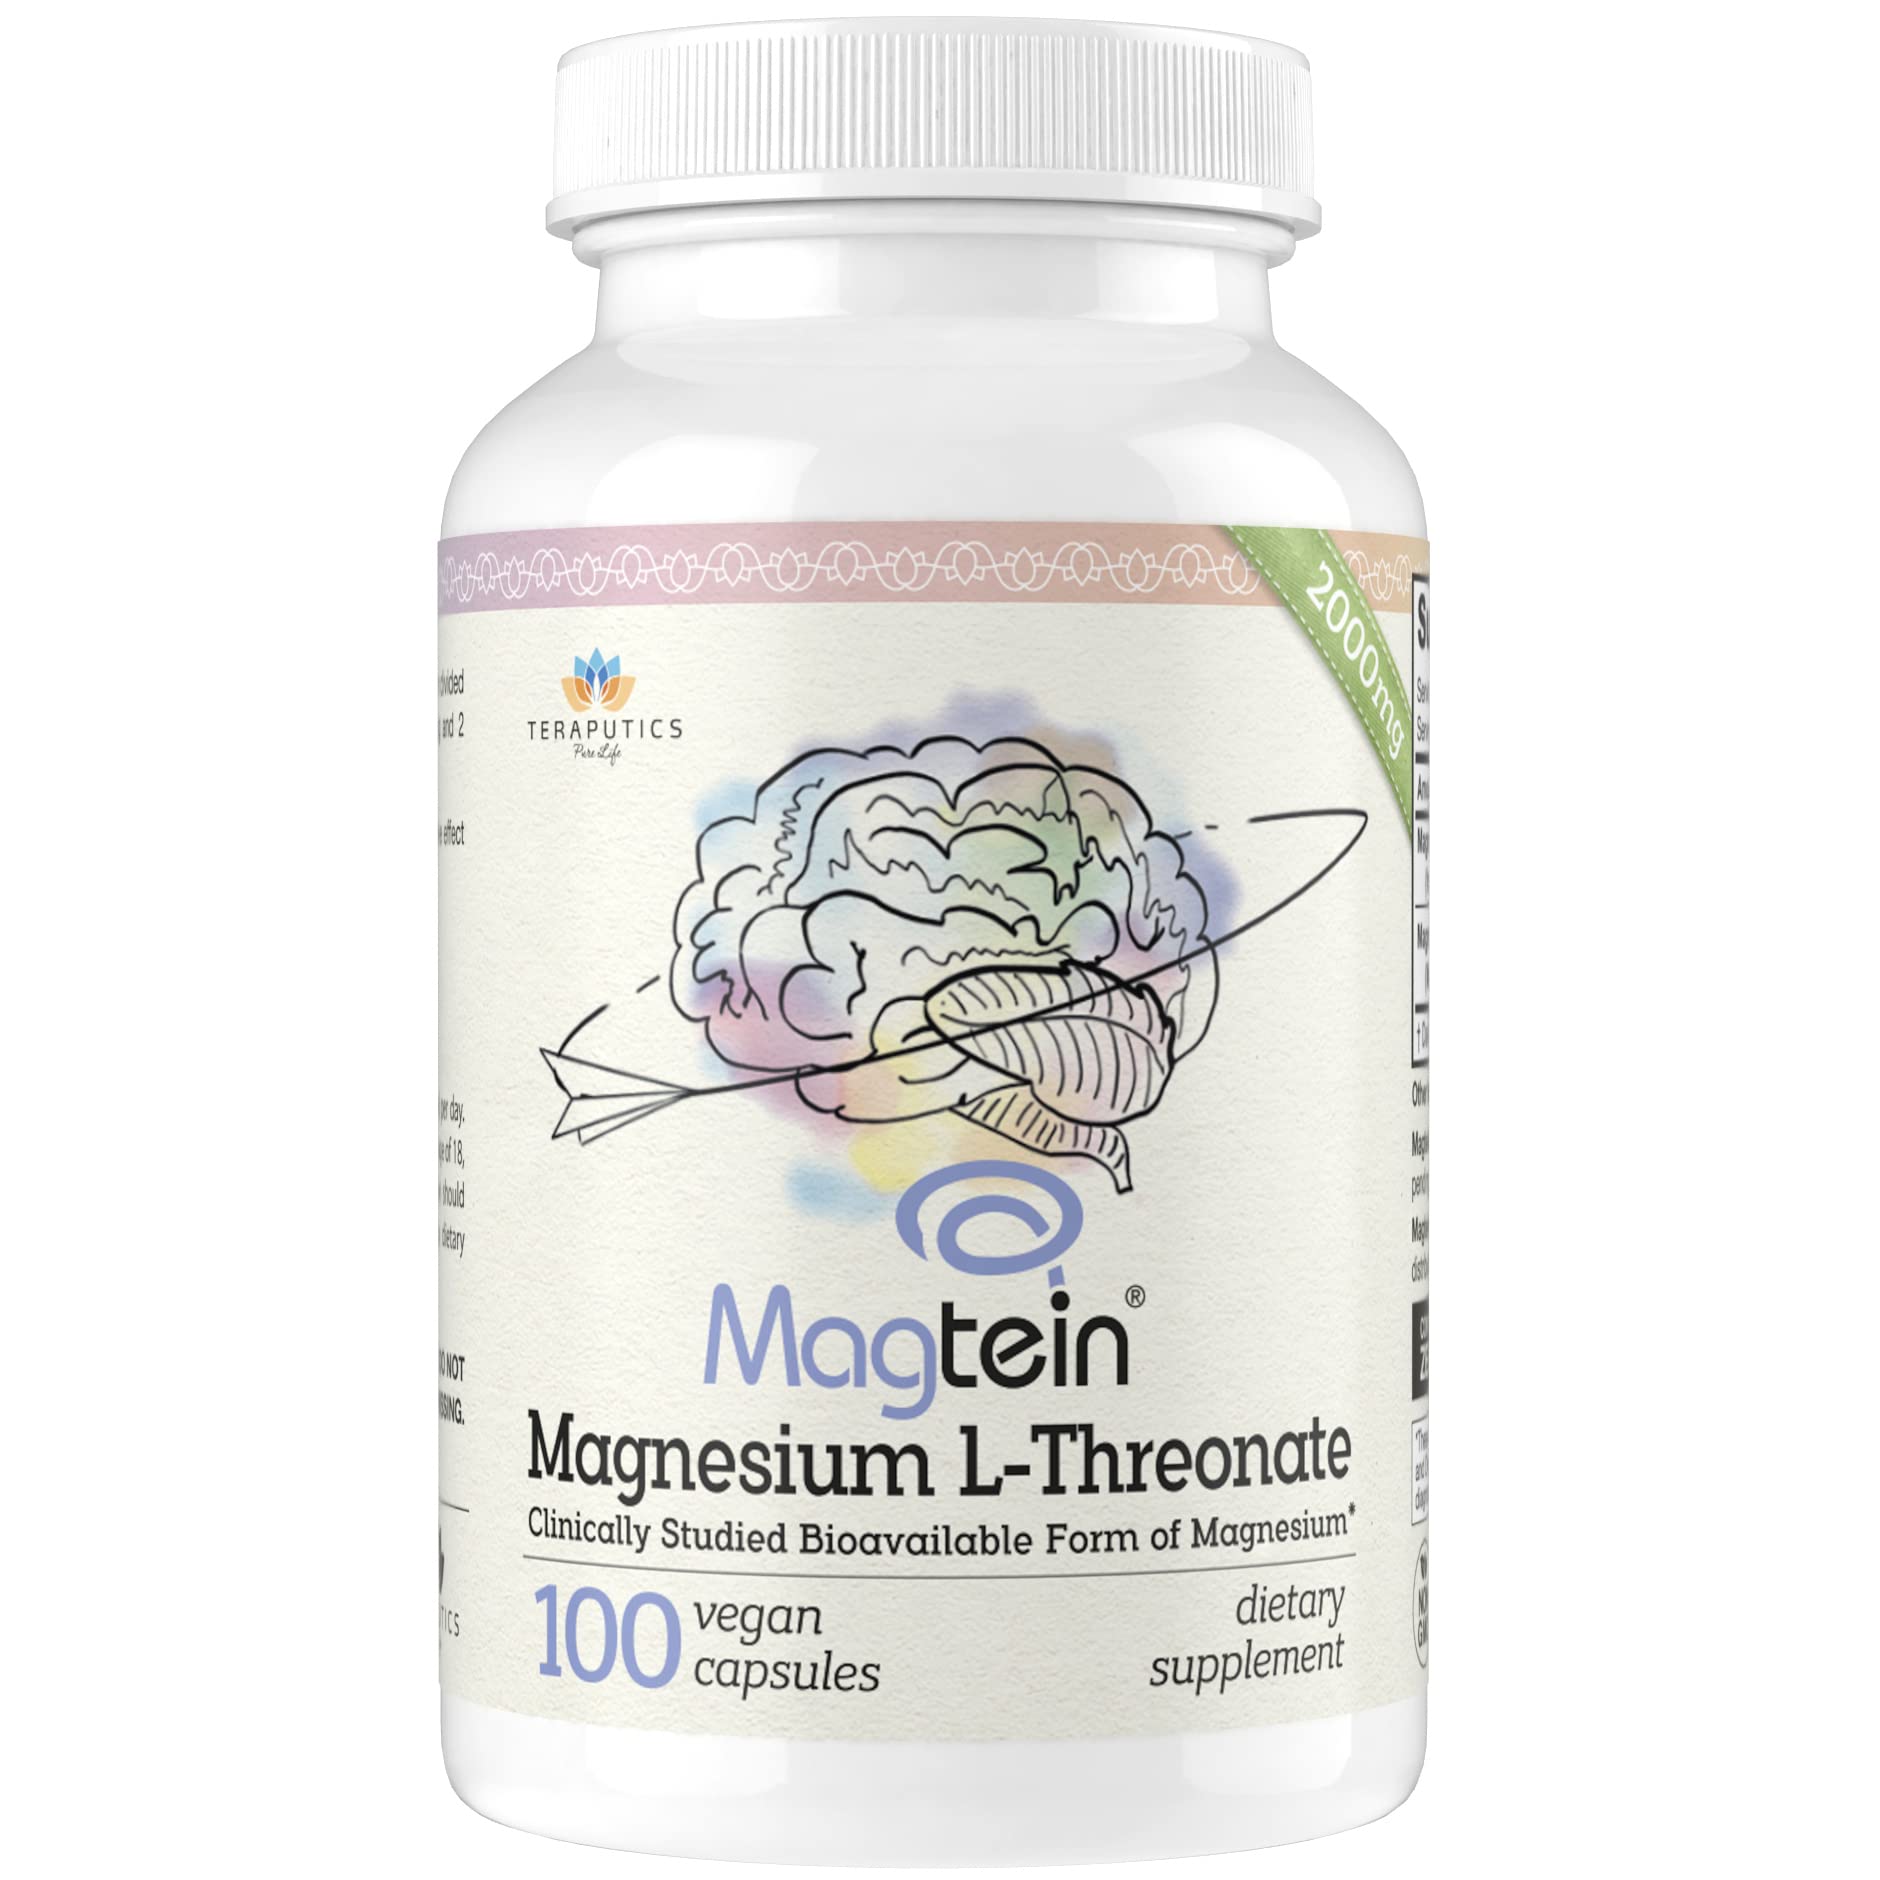 Book Cover Magnesium L Threonate (Original Magtein Formula) - 2000 mg - 100 Vegan Capsules - Non-GMO Highly Absorptive Pure Magnesium Supplement - A Vitamin for Cognition - Pills are Without Laxative Properties